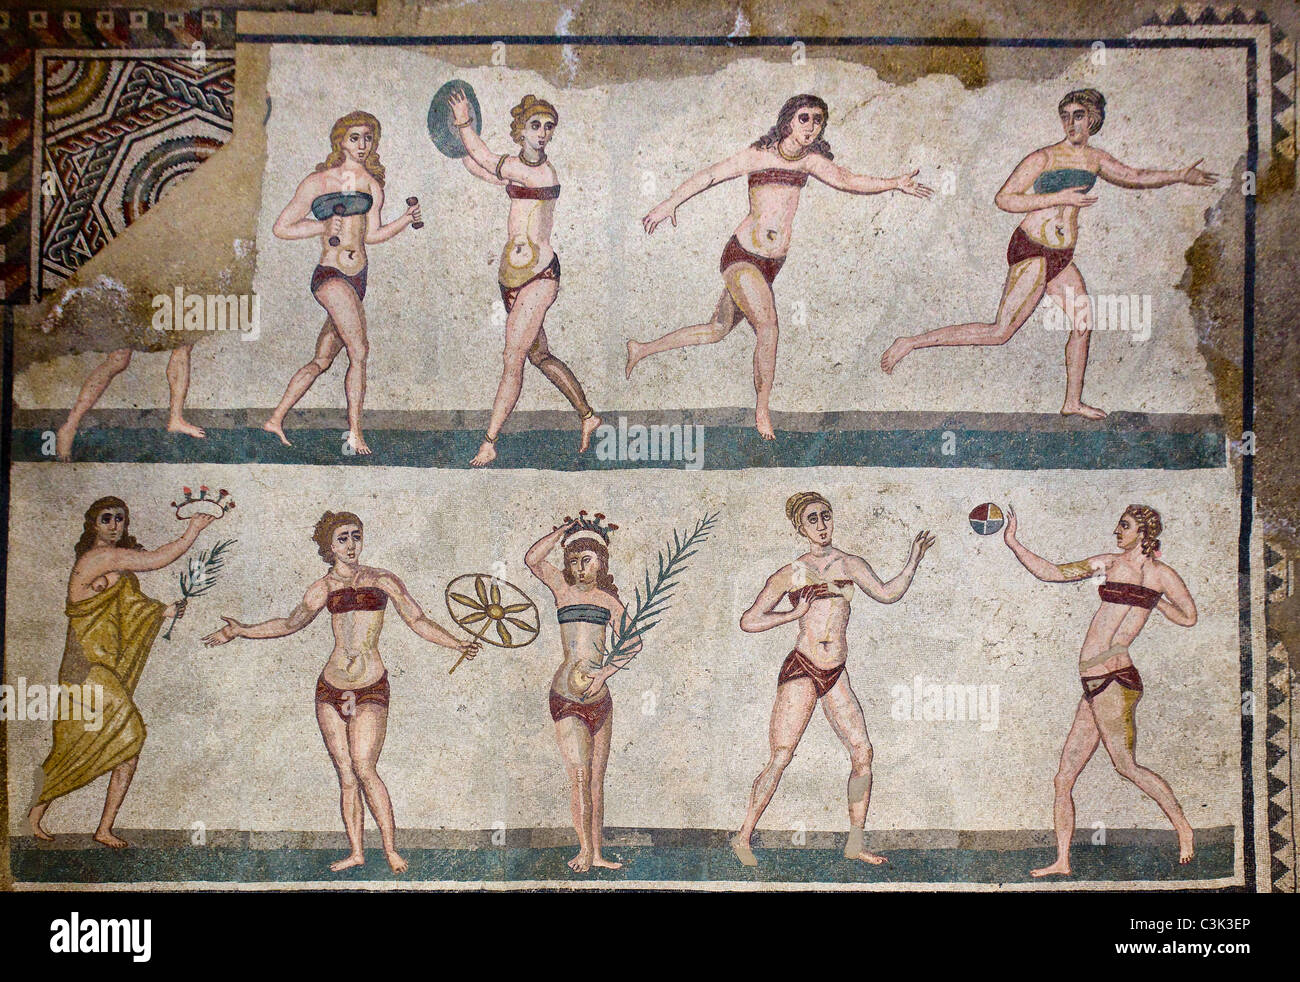 Roman mosaic at Piazza Armerina in Sicily depicting nymphs or female gymnasts playing ball games. Stock Photo